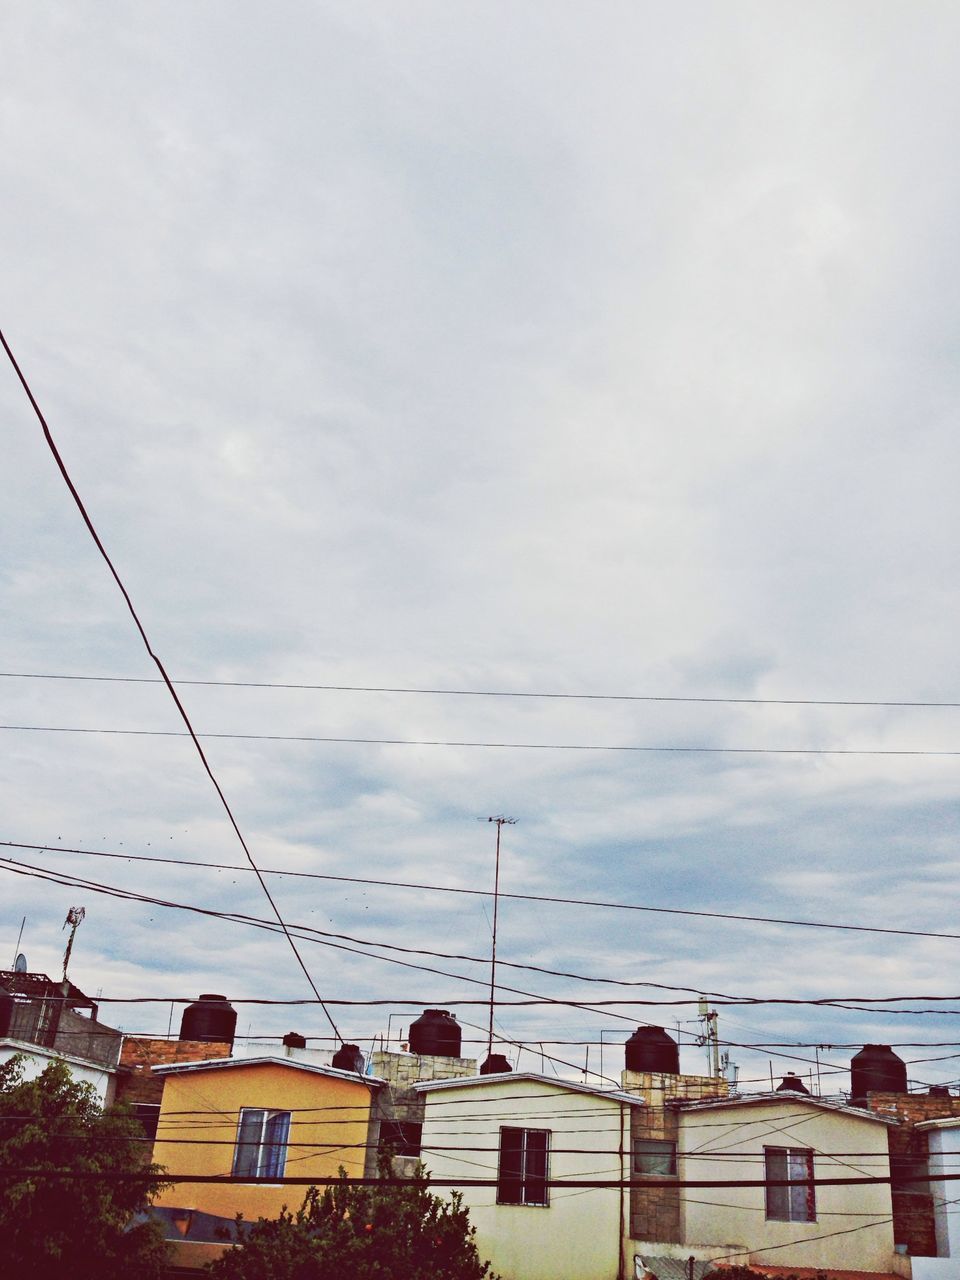 sky, cloud - sky, power line, low angle view, cable, cloudy, electricity pylon, electricity, power supply, cloud, connection, built structure, weather, nature, outdoors, day, no people, building exterior, architecture, fuel and power generation